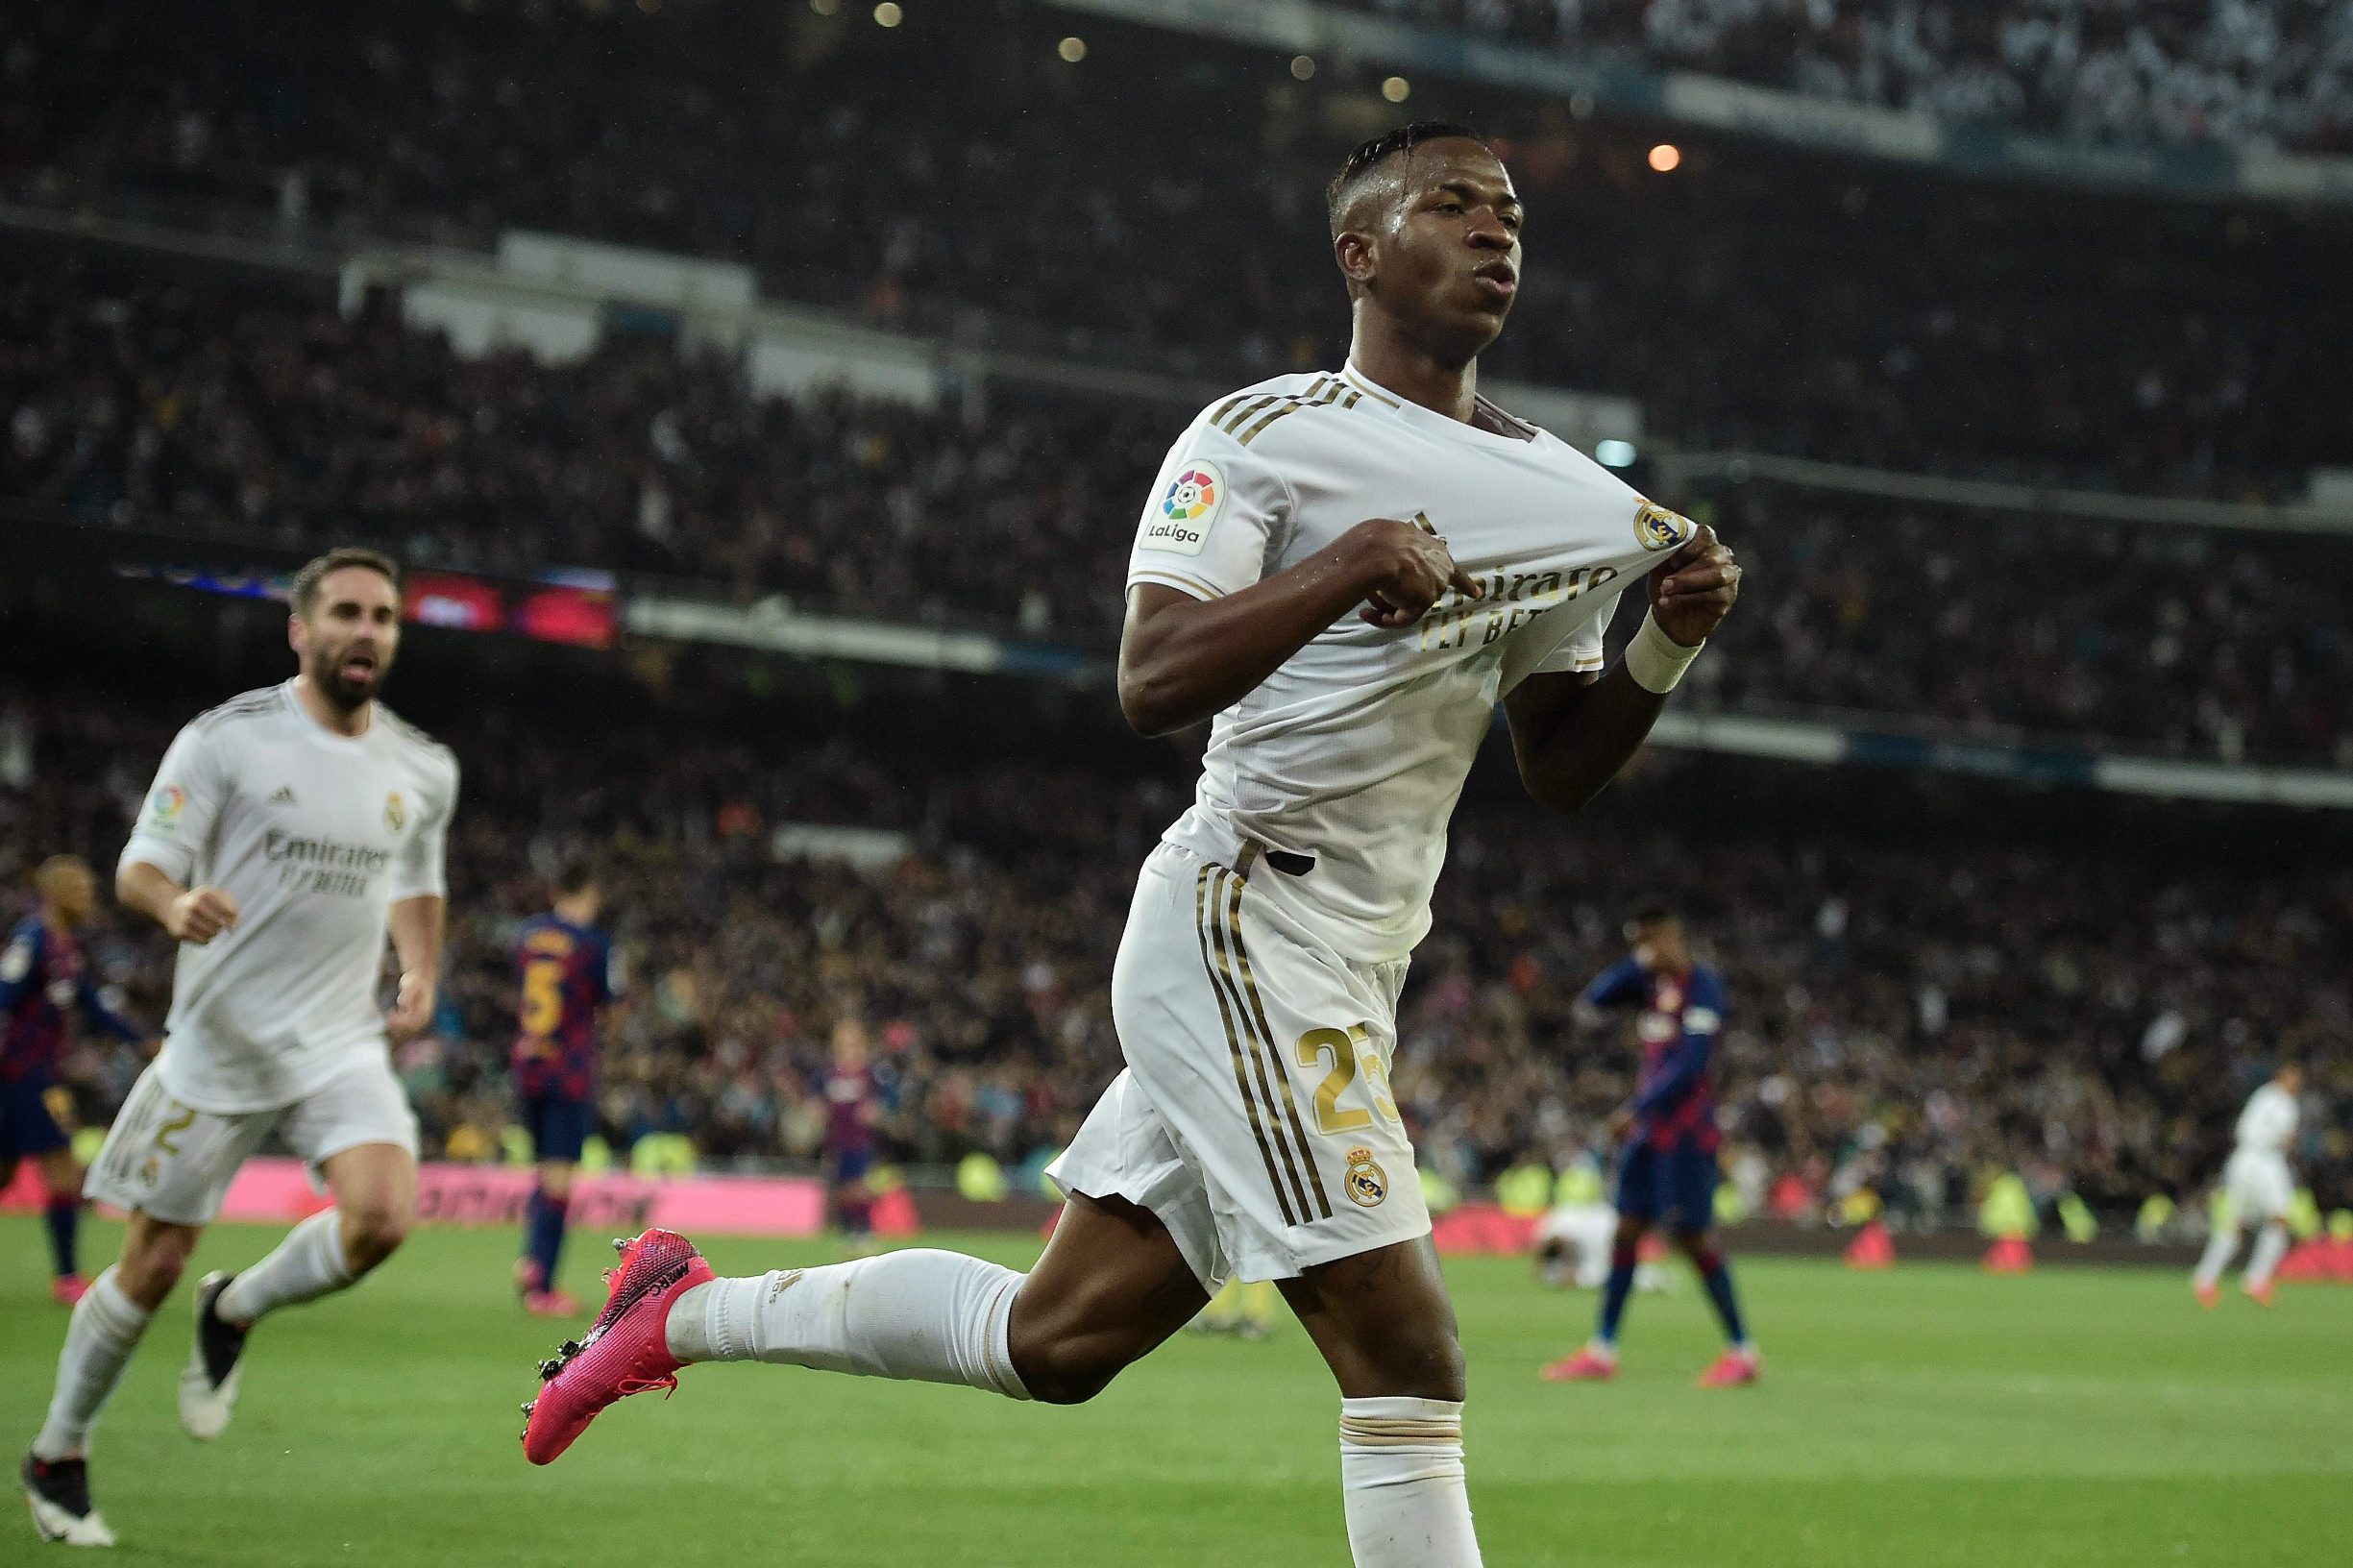 Real Madrid's Brazilian forward Vinicius Junior celebrates a goal during the Spanish League football match between Real Madrid and Barcelona at the Santiago Bernabeu stadium in Madrid on March 1, 2020. (Photo by OSCAR DEL POZO / AFP)